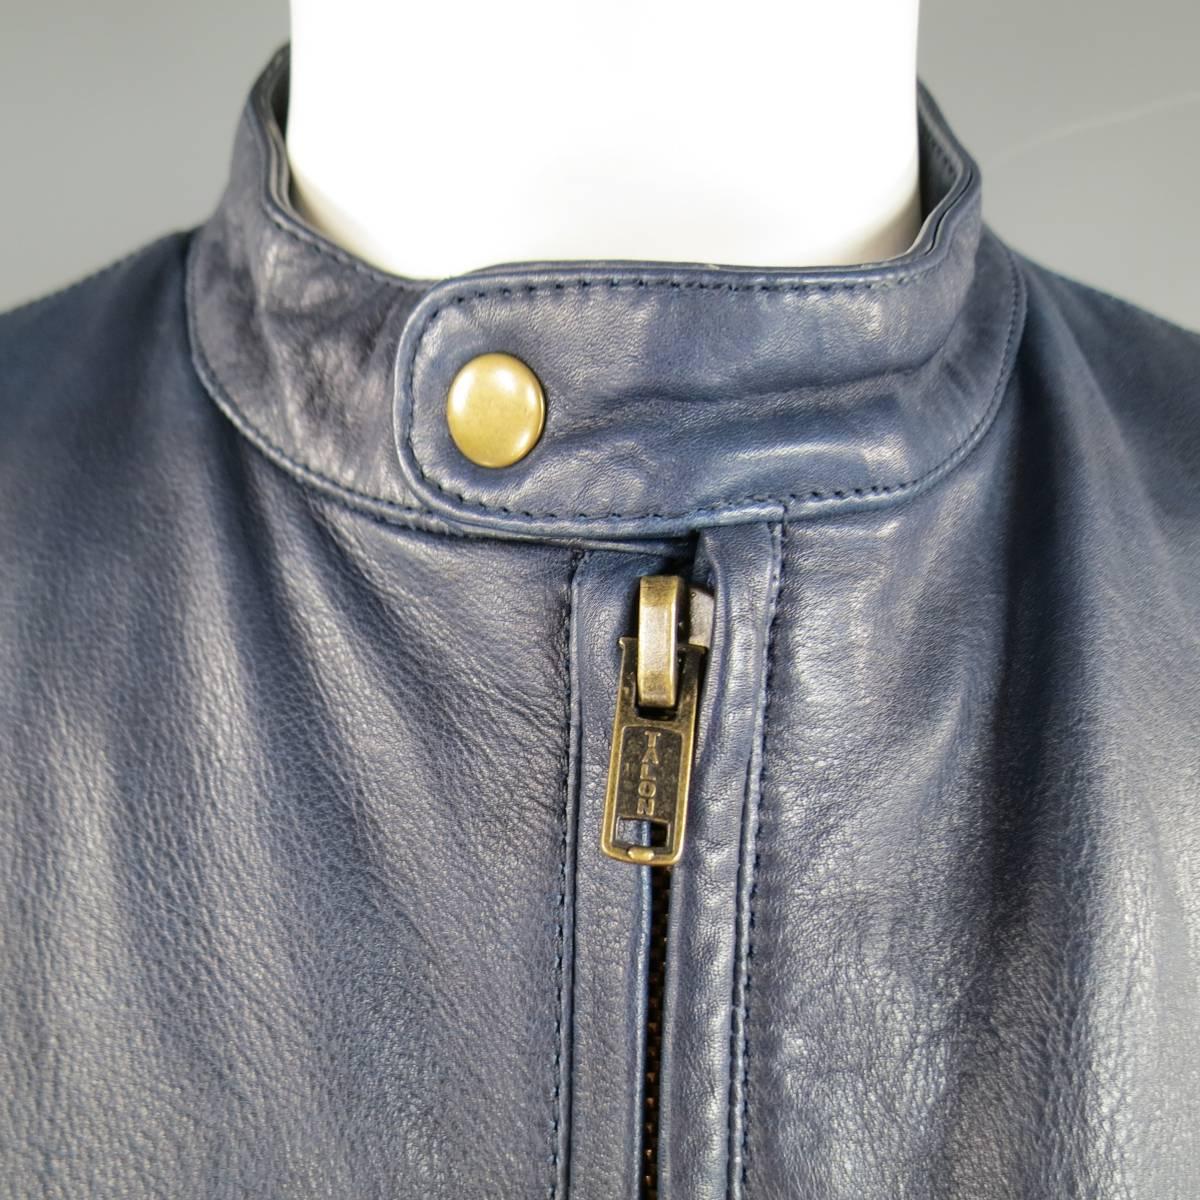 Classic fashion moto jacket by LEVI'S MADE & CRAFTED in a textured navy blue leather featuring a snap over band collar with dark gold hardware, tripe zip pockets, zip cuffs, and blue pattern lining. Made in Italy. 
Retails at $850.00.
 
Excellent